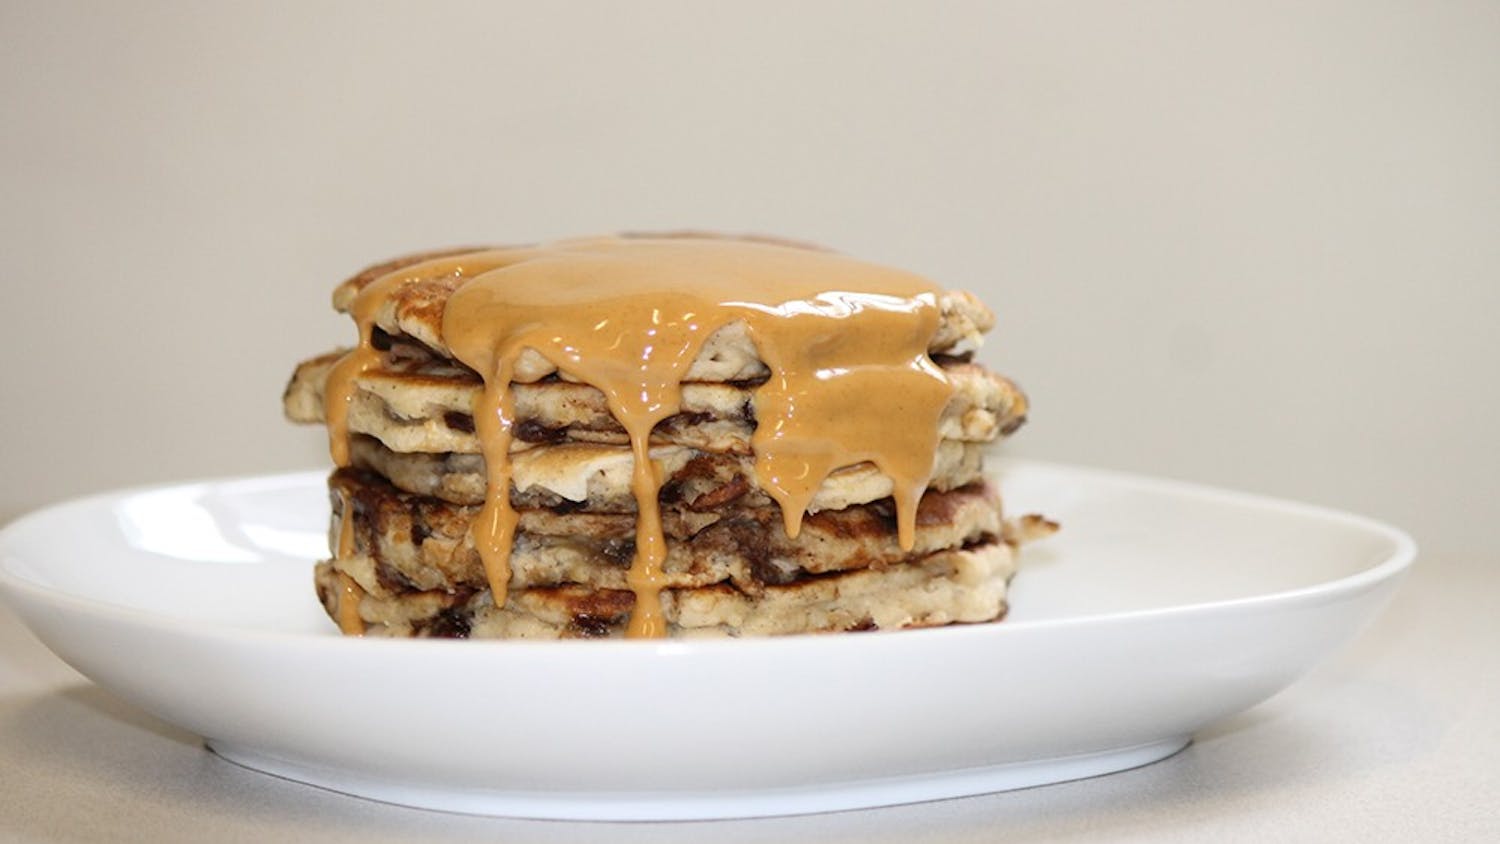 Instead of maple syrup, this recipe can use melted peanut butter as a topping.